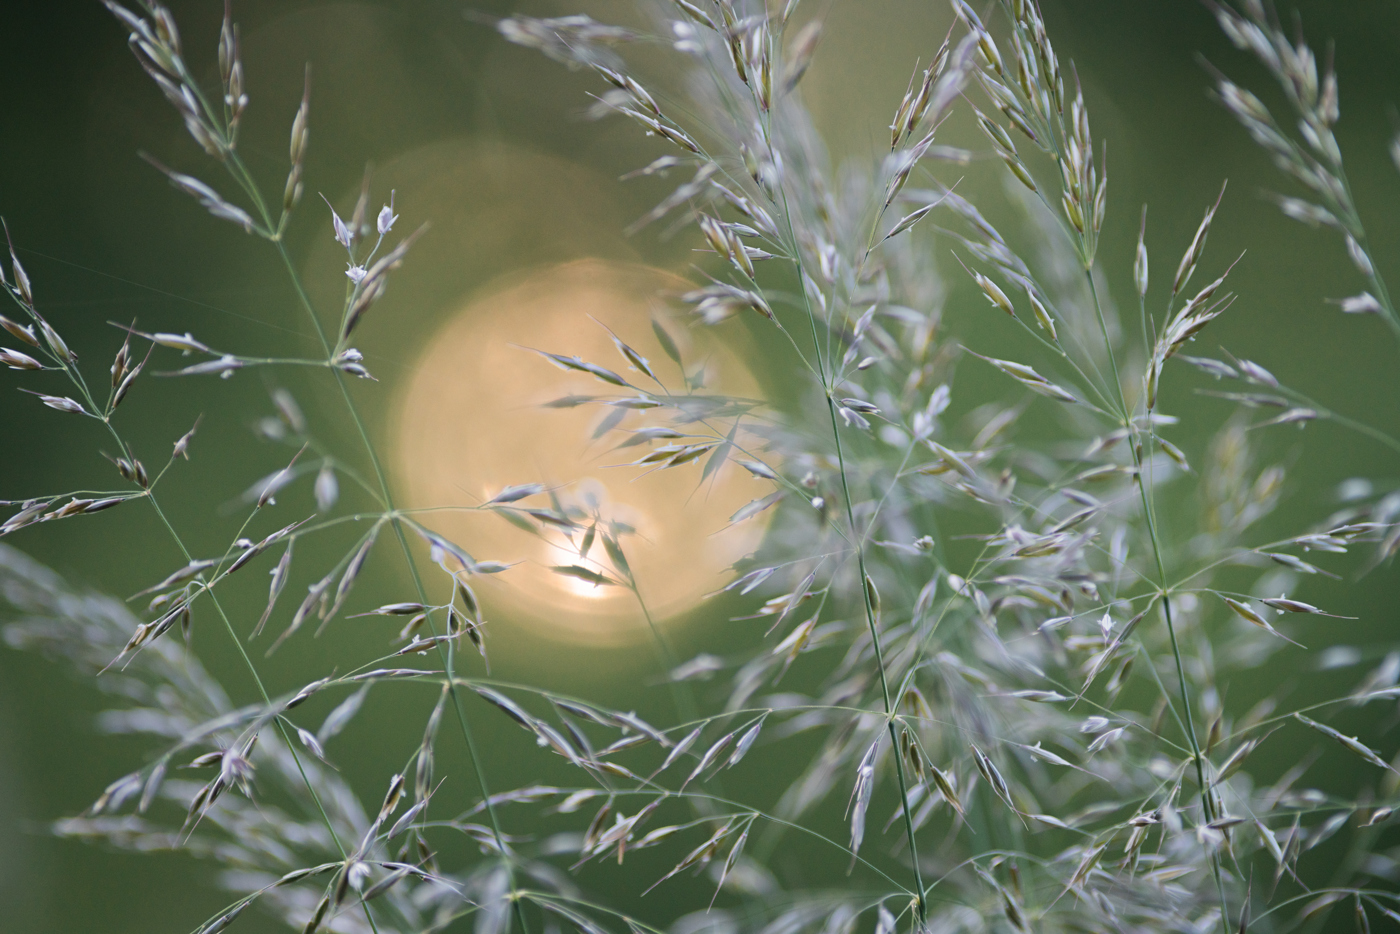 The image features delicate grass stems against a soft-focus background. A warm, glowing light, suggestive of a setting sun, peeks through the slender blades, casting subtle light and shadows. The scene evokes the gentle beauty of a North Yorkshire evening. a close up of a plant